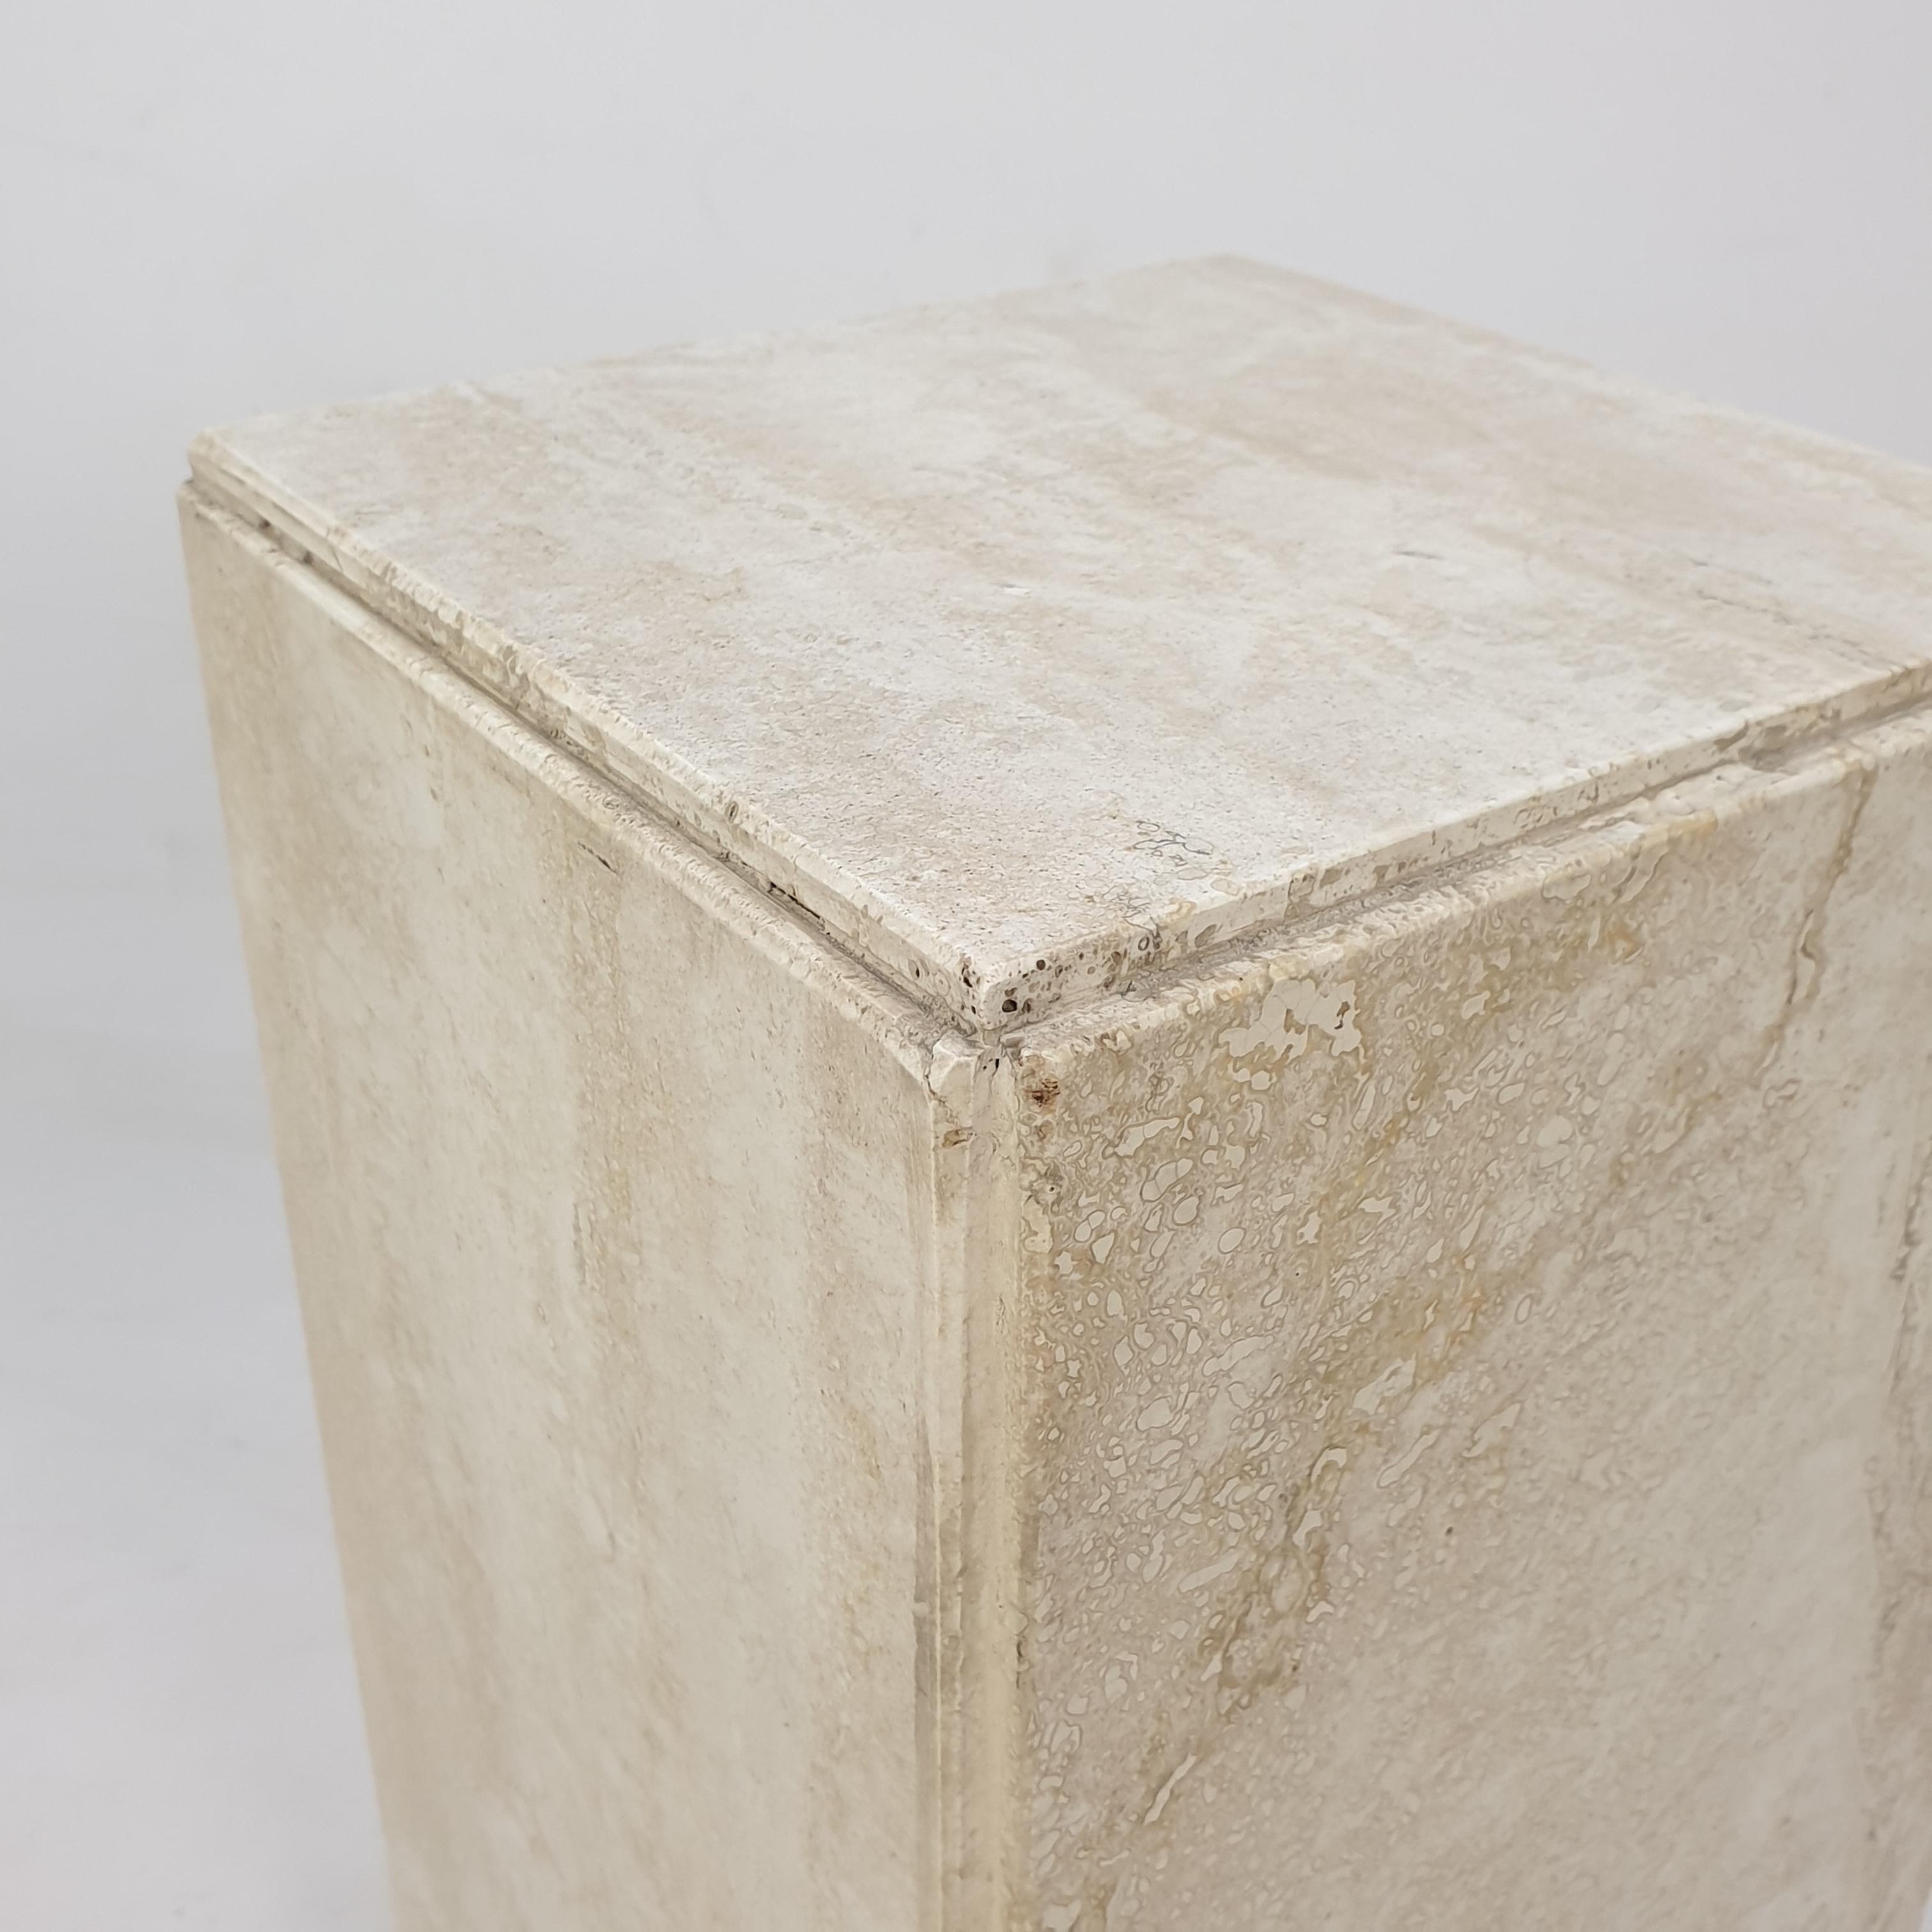 Italian Travertine Side Table or Pedestal, 1980's For Sale 5